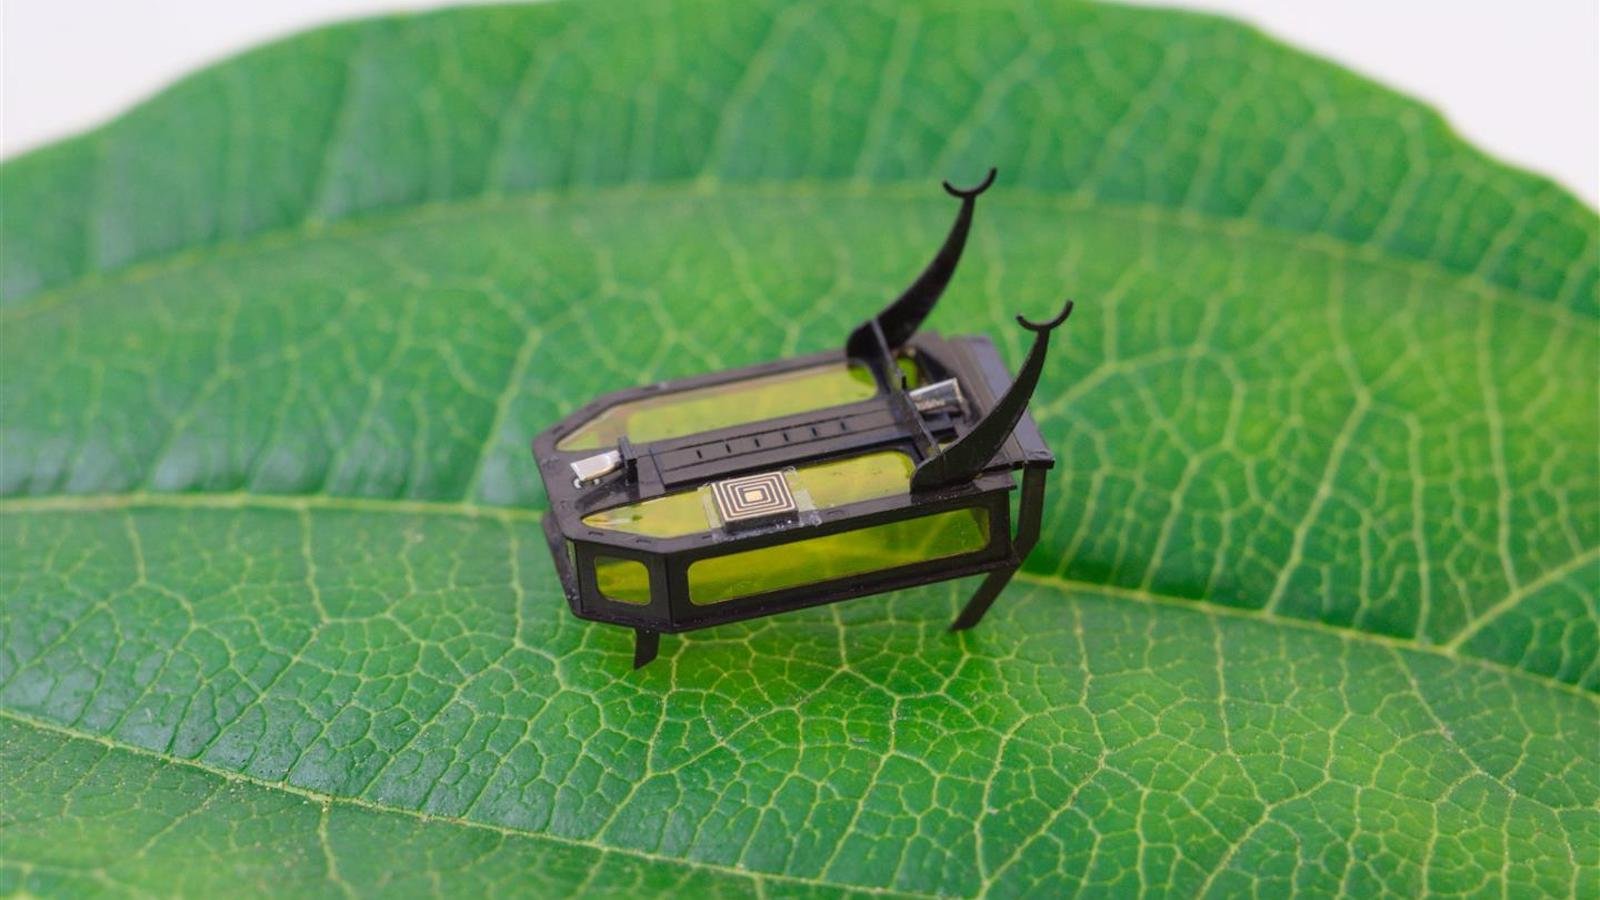 Science Robotics RoBeetle insect-sized microbot runs on methanol